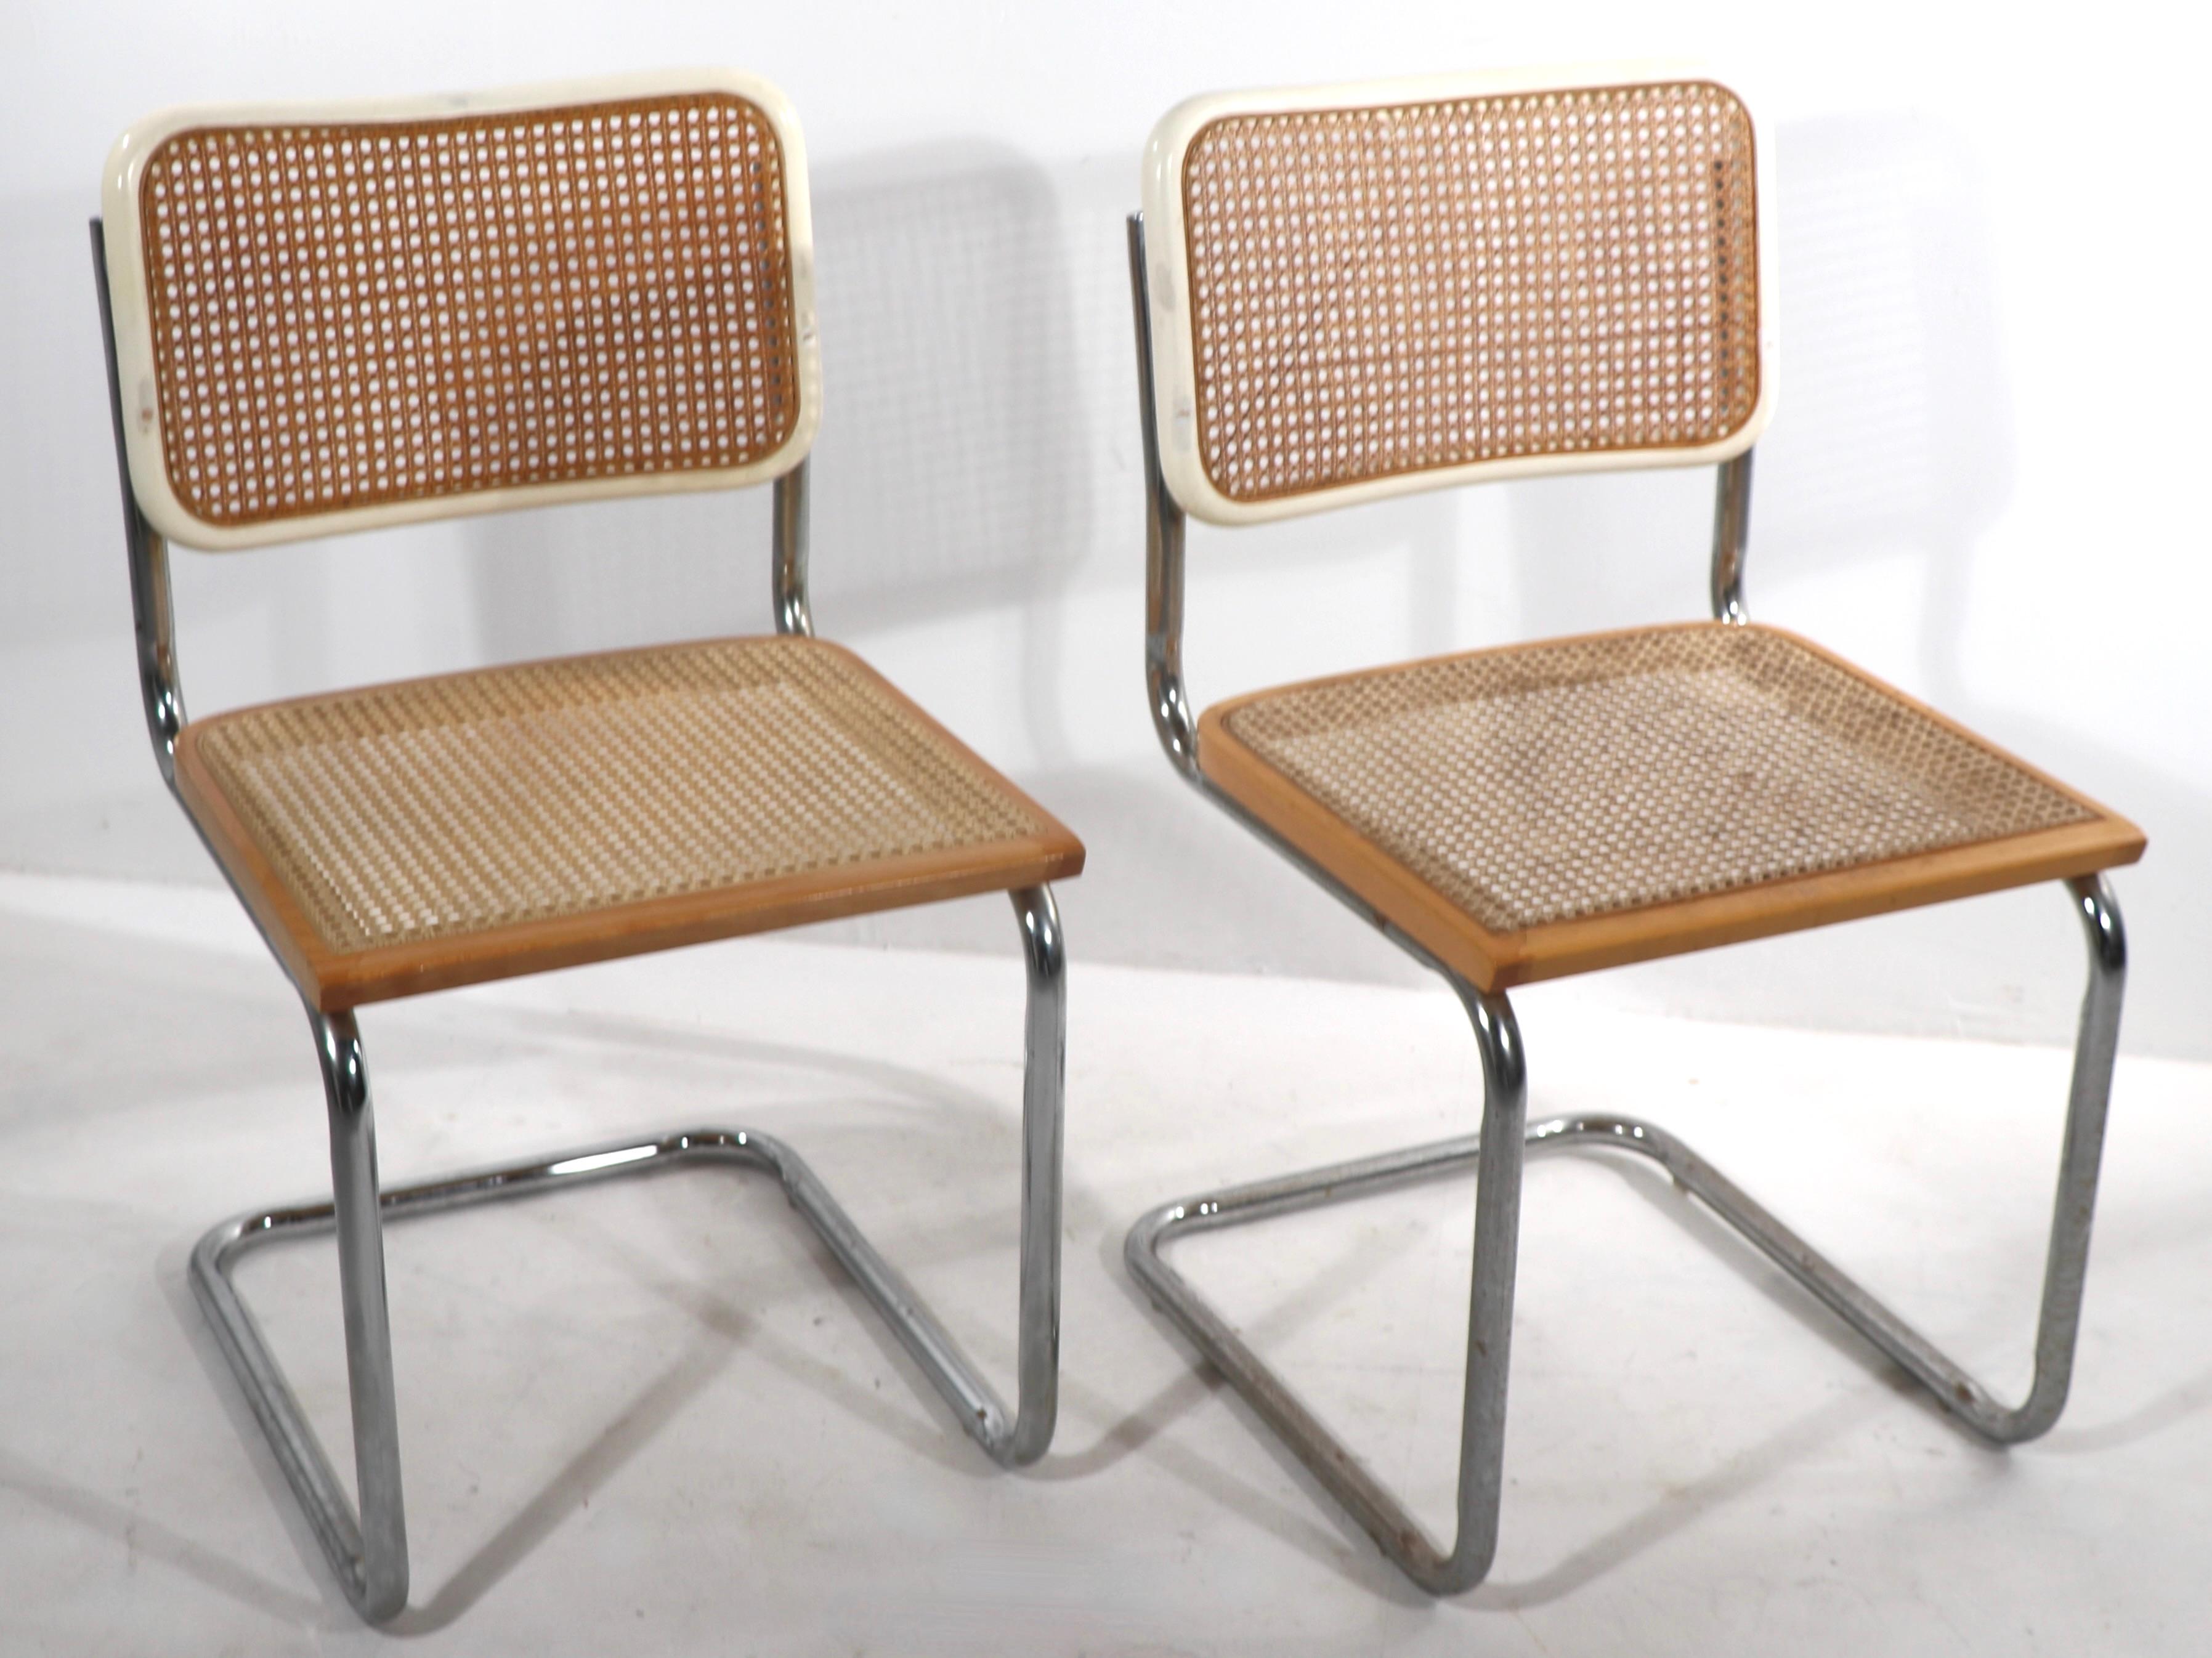 Canadian Pr. 1970's Cesca Dining Chairs Designed by Marcel Breuer